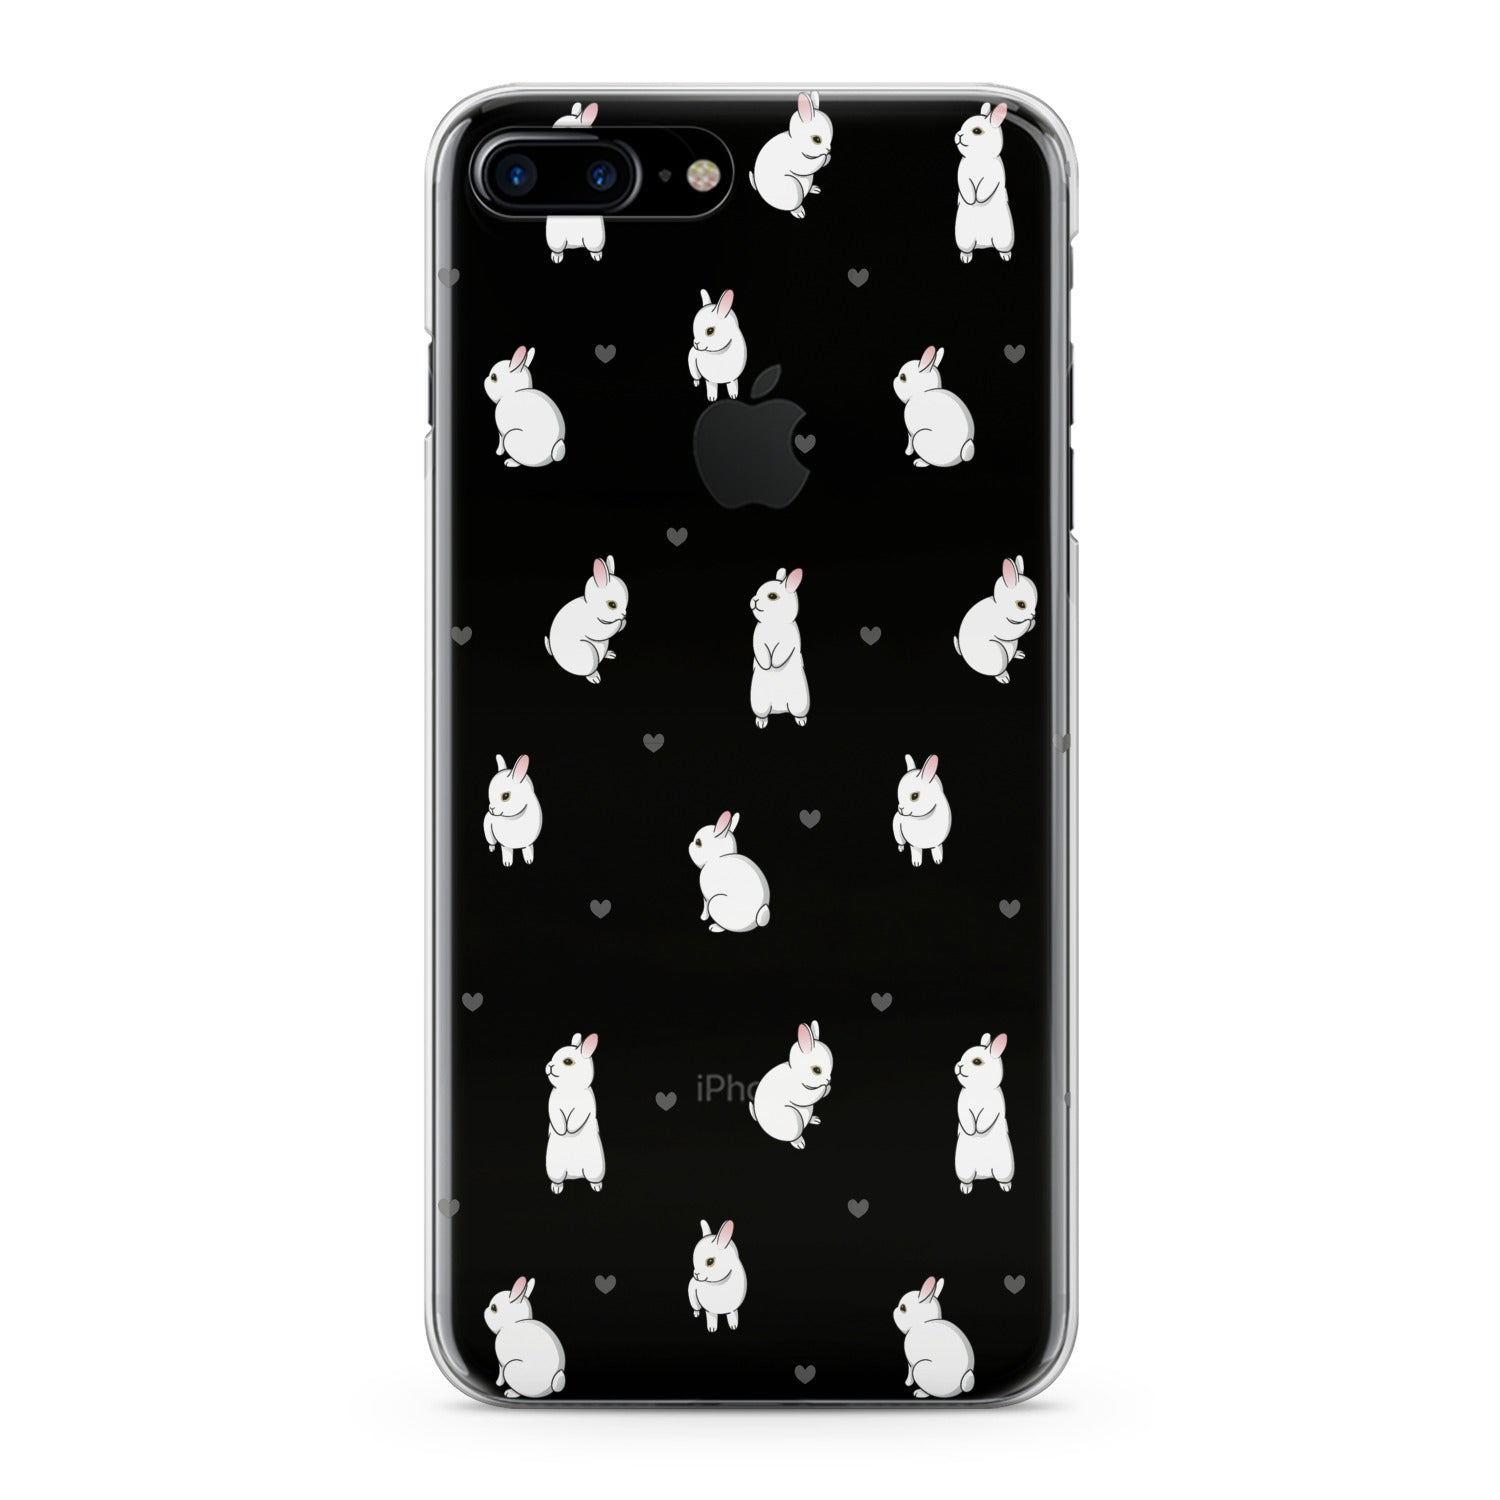 Lex Altern White Bunny Phone Case for your iPhone & Android phone.